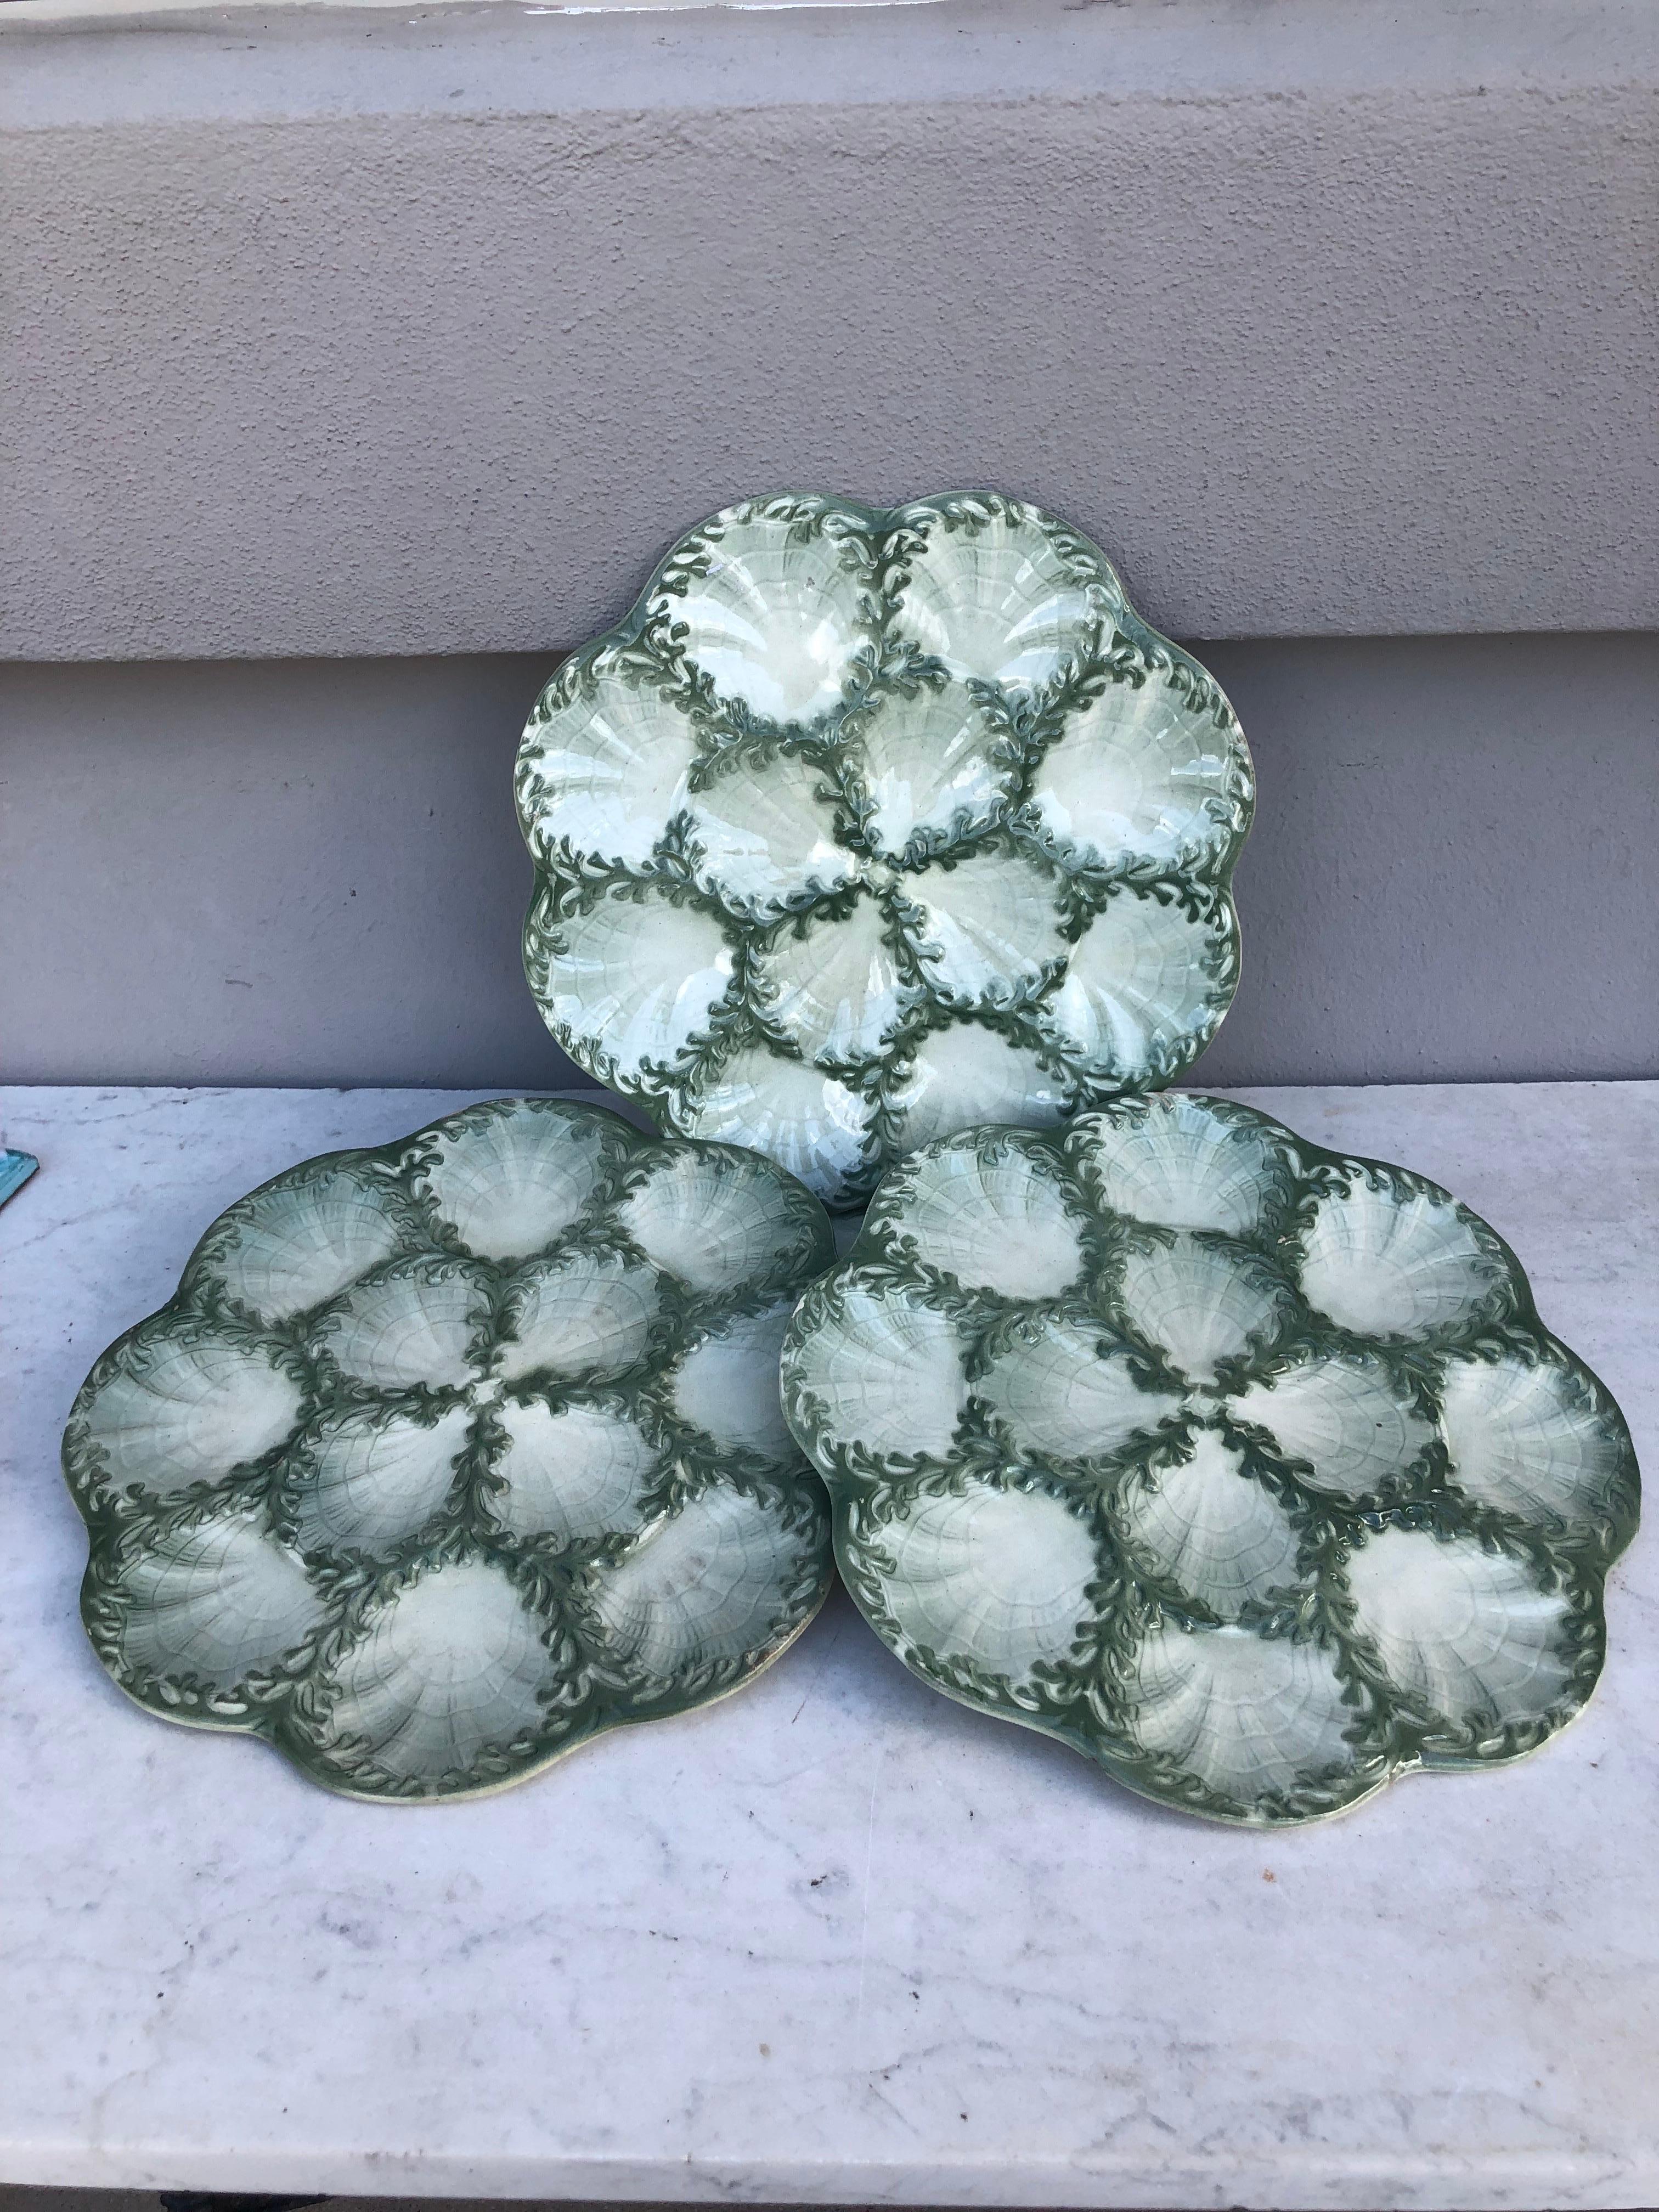 Large rare Majolica oyster plate Keller and Guerin Saint Clement, circa 1890.
Decorated with green seaweeds.
This plate exist in green and pink with 2 different sizes.